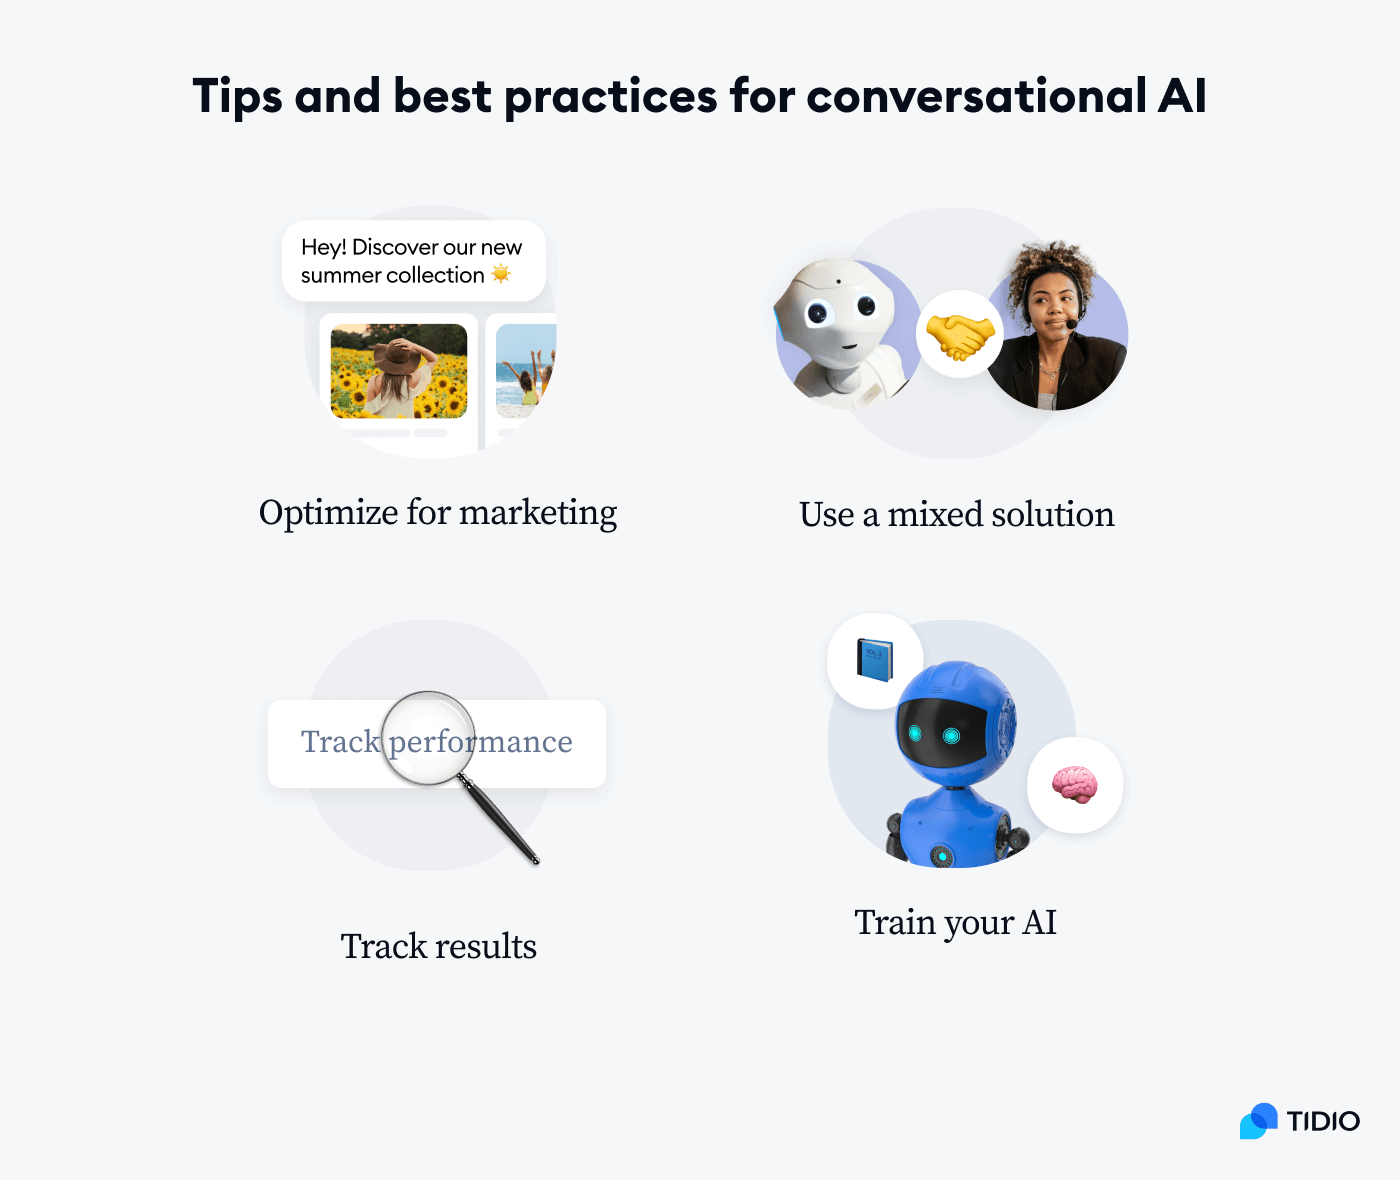 tips and best practices for conversational AI